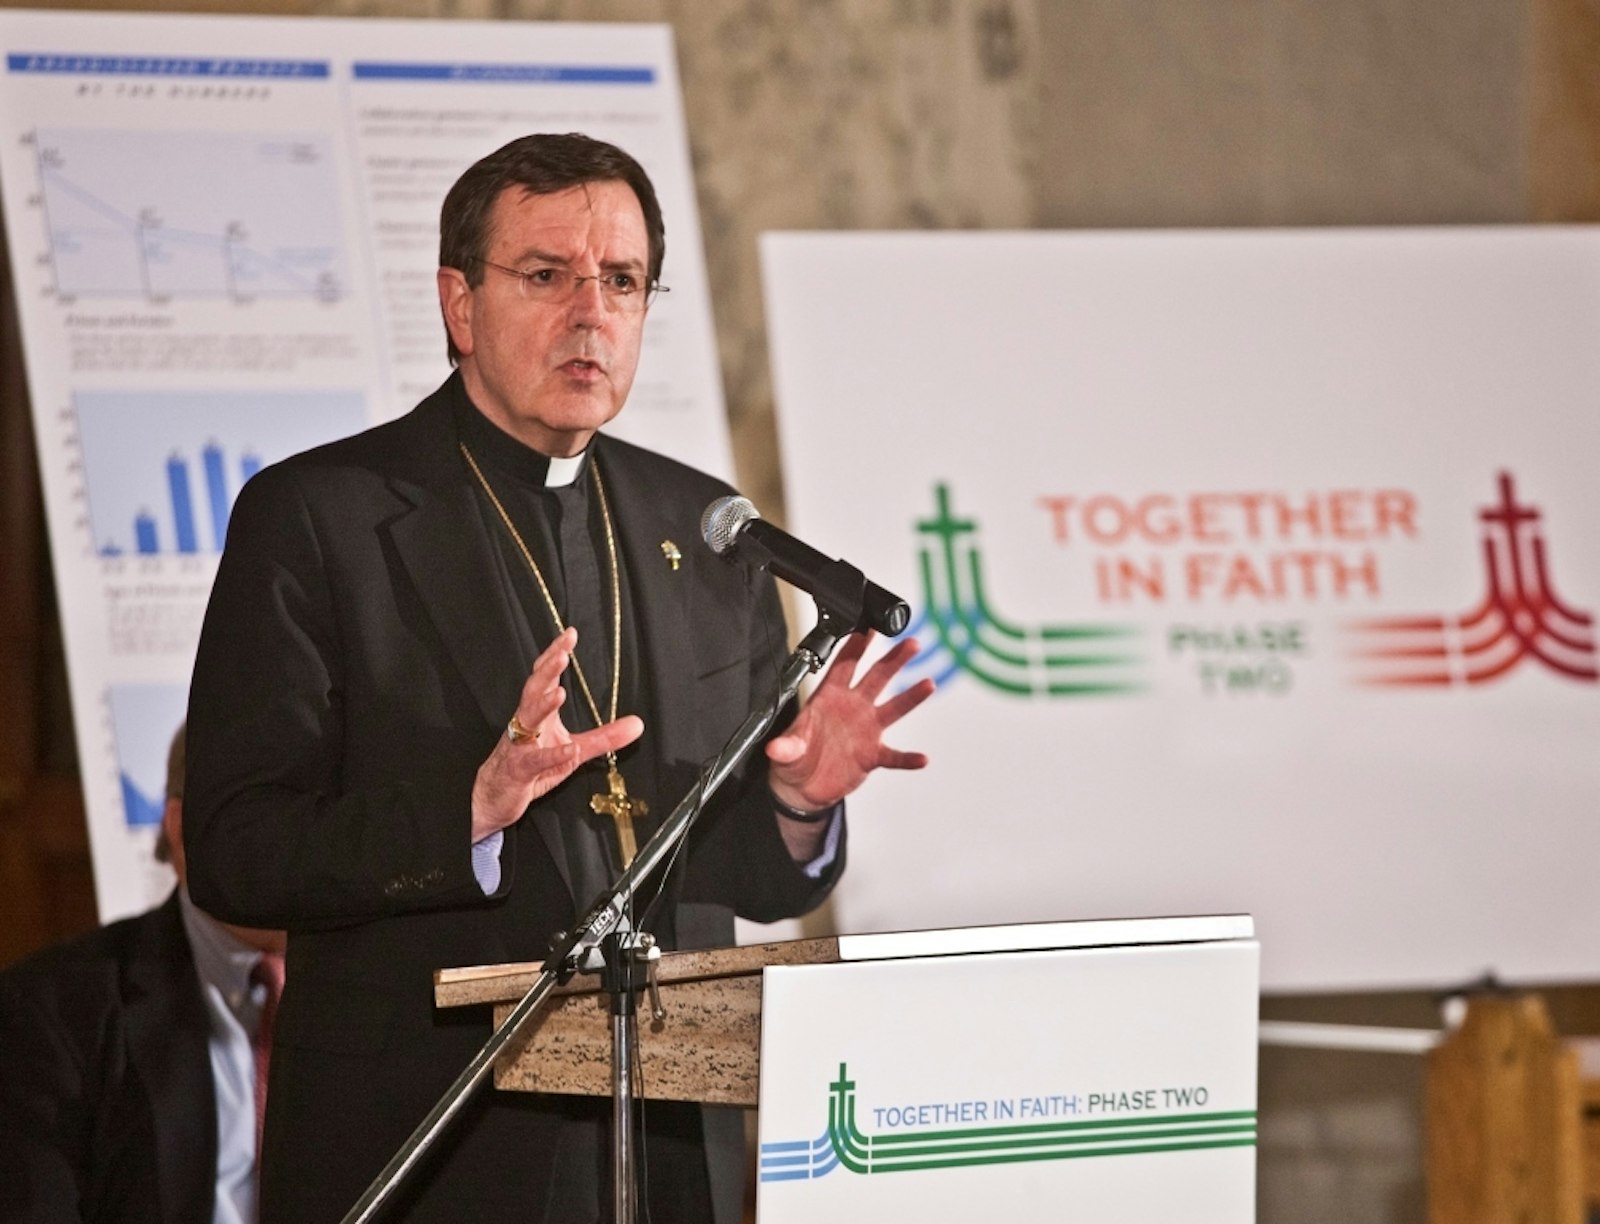 Archbishop Vigneron speaks about the Archdiocese of Detroit's "Together in Faith" pastoral planning process Feb. 20, 2012, during a news conference at Transfiguration Church in Detroit. (Larry A. Peplin | Detroit Catholic file photo)